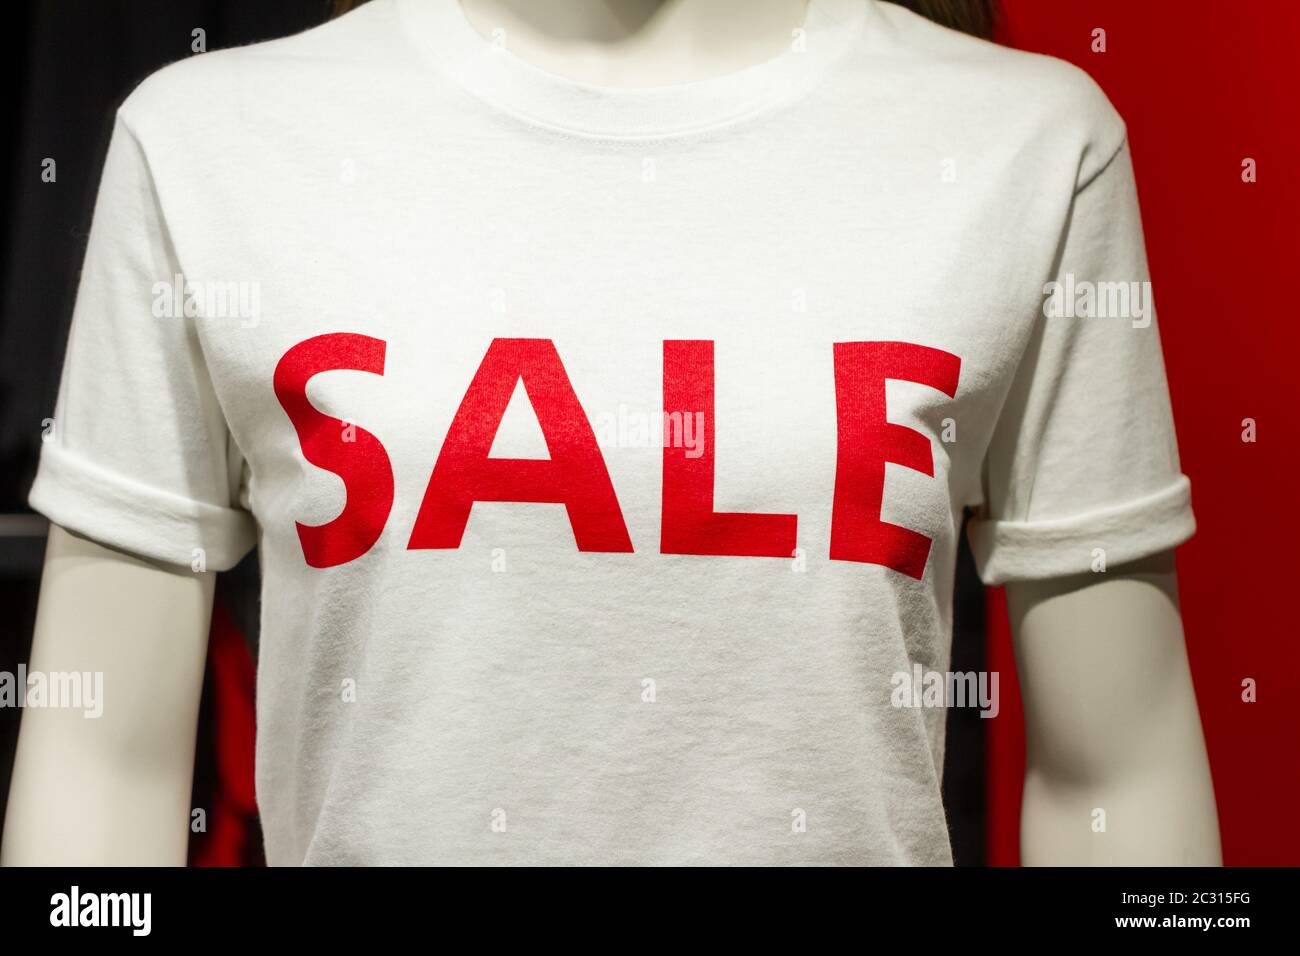 Female upper body dummy in a shop display with the word SALE written on it. Consumerism and low price concept. Stock Photo